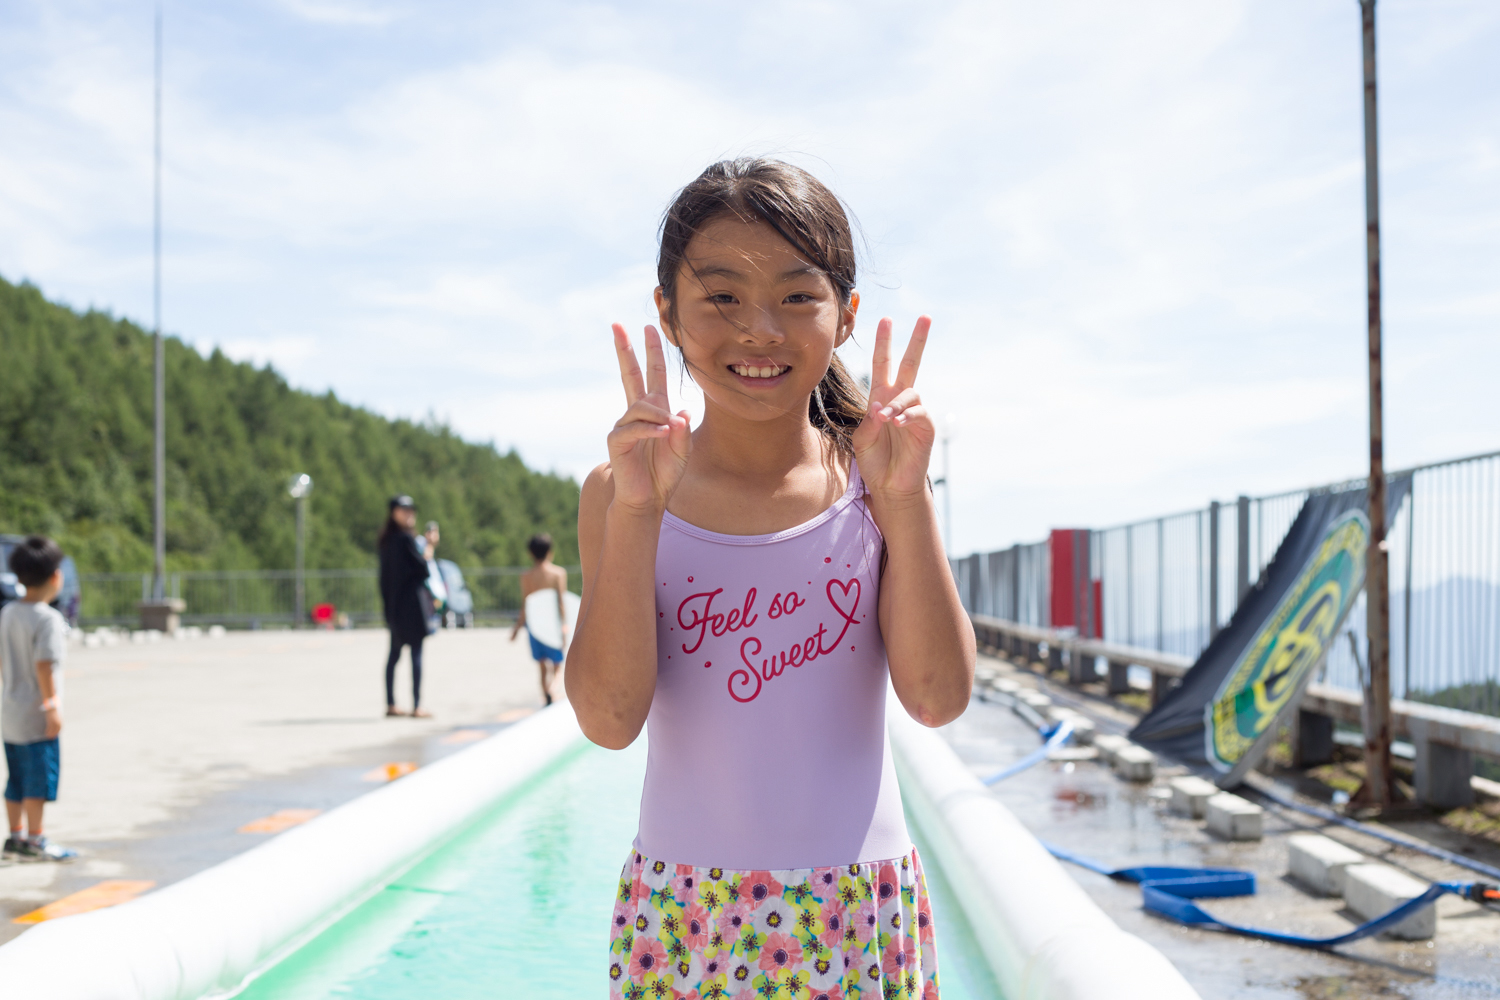 Kokomi-chan I came to BEGINNING for the first time with my dad and mom.Flat skimboarding is difficult, but I'm happy and fun to do it!